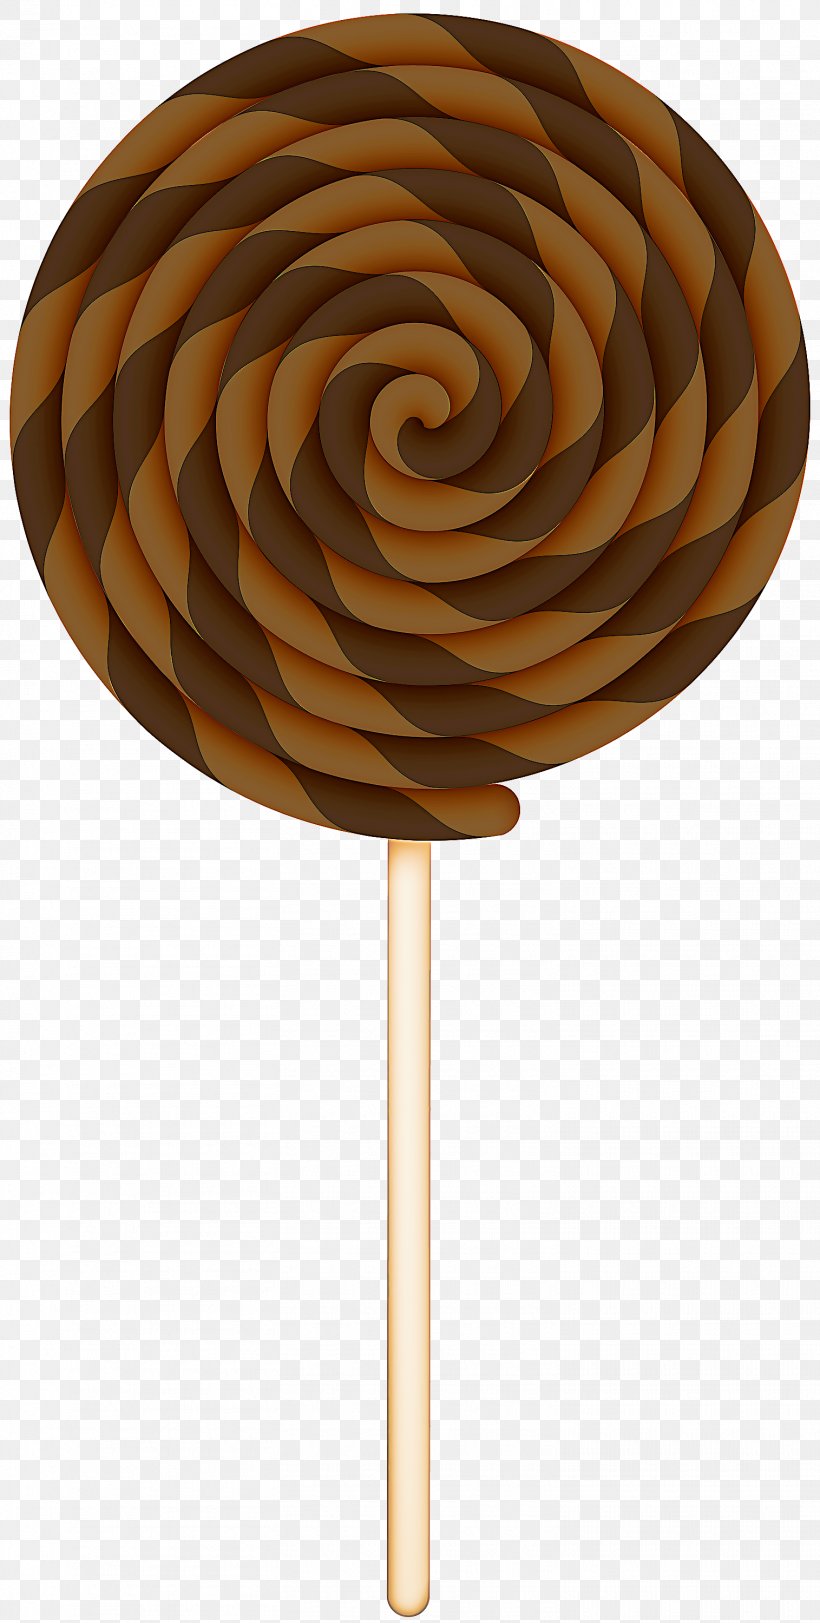 Lollipop Table Stick Candy Confectionery Spiral, PNG, 1515x3000px, Lollipop, Confectionery, Food, Spiral, Stick Candy Download Free